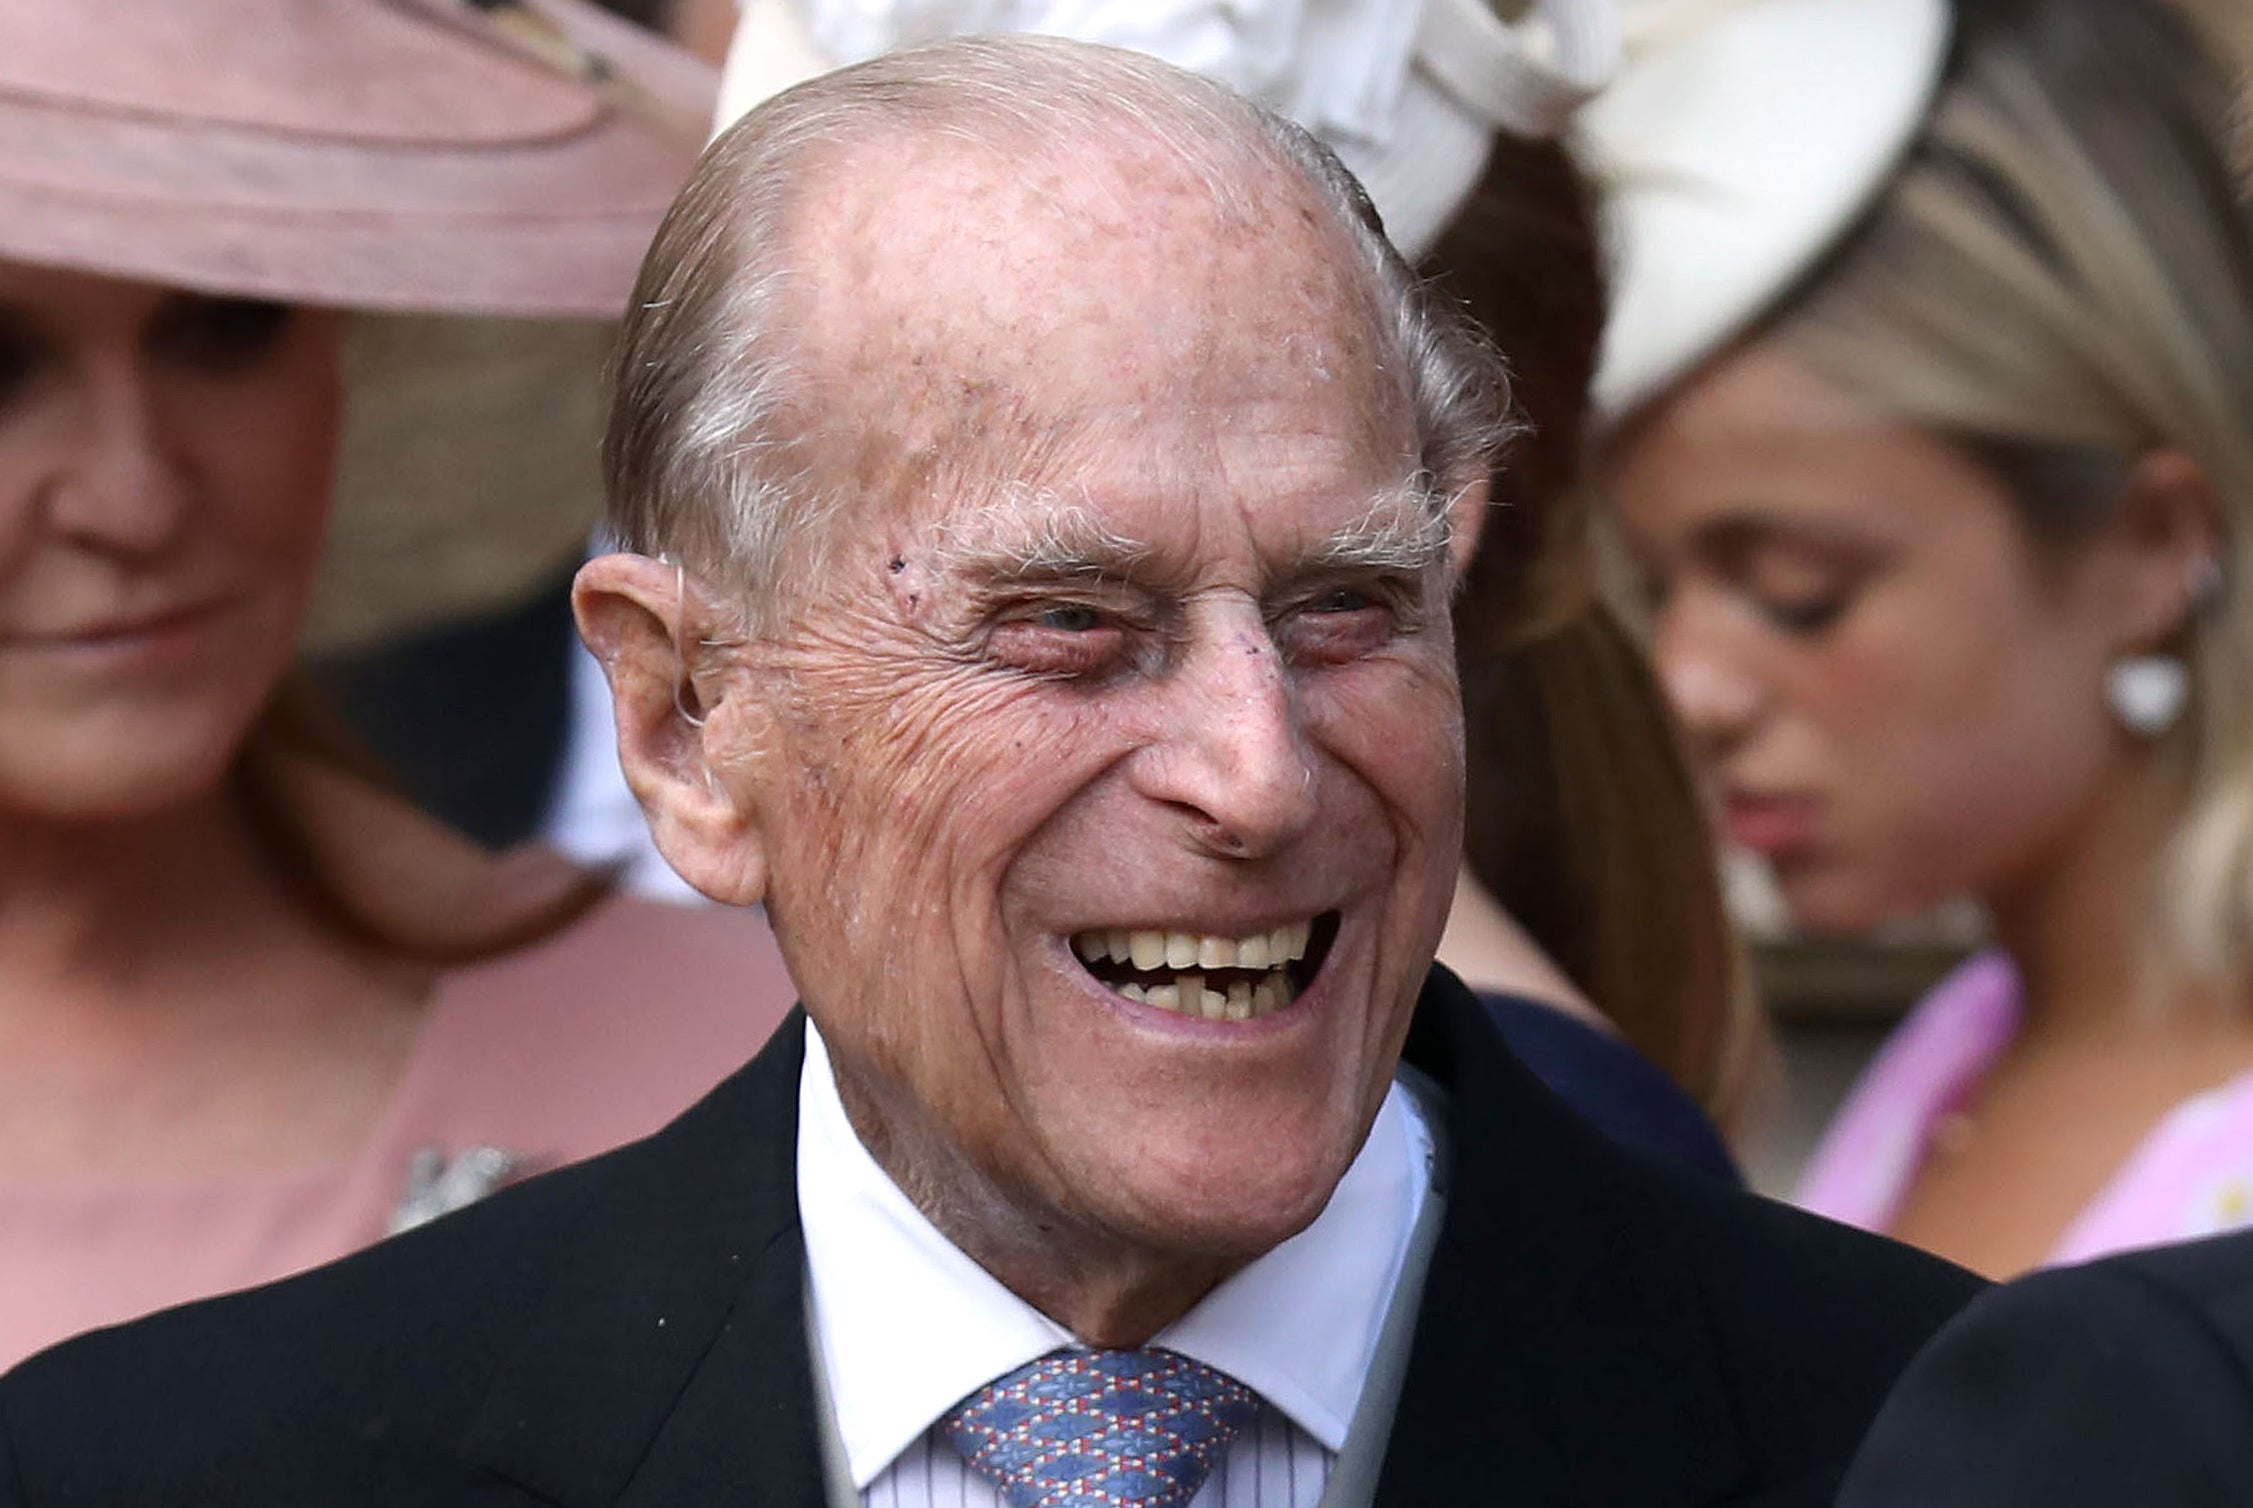 Overheard: the Duke of Edinburgh was noted for his humour